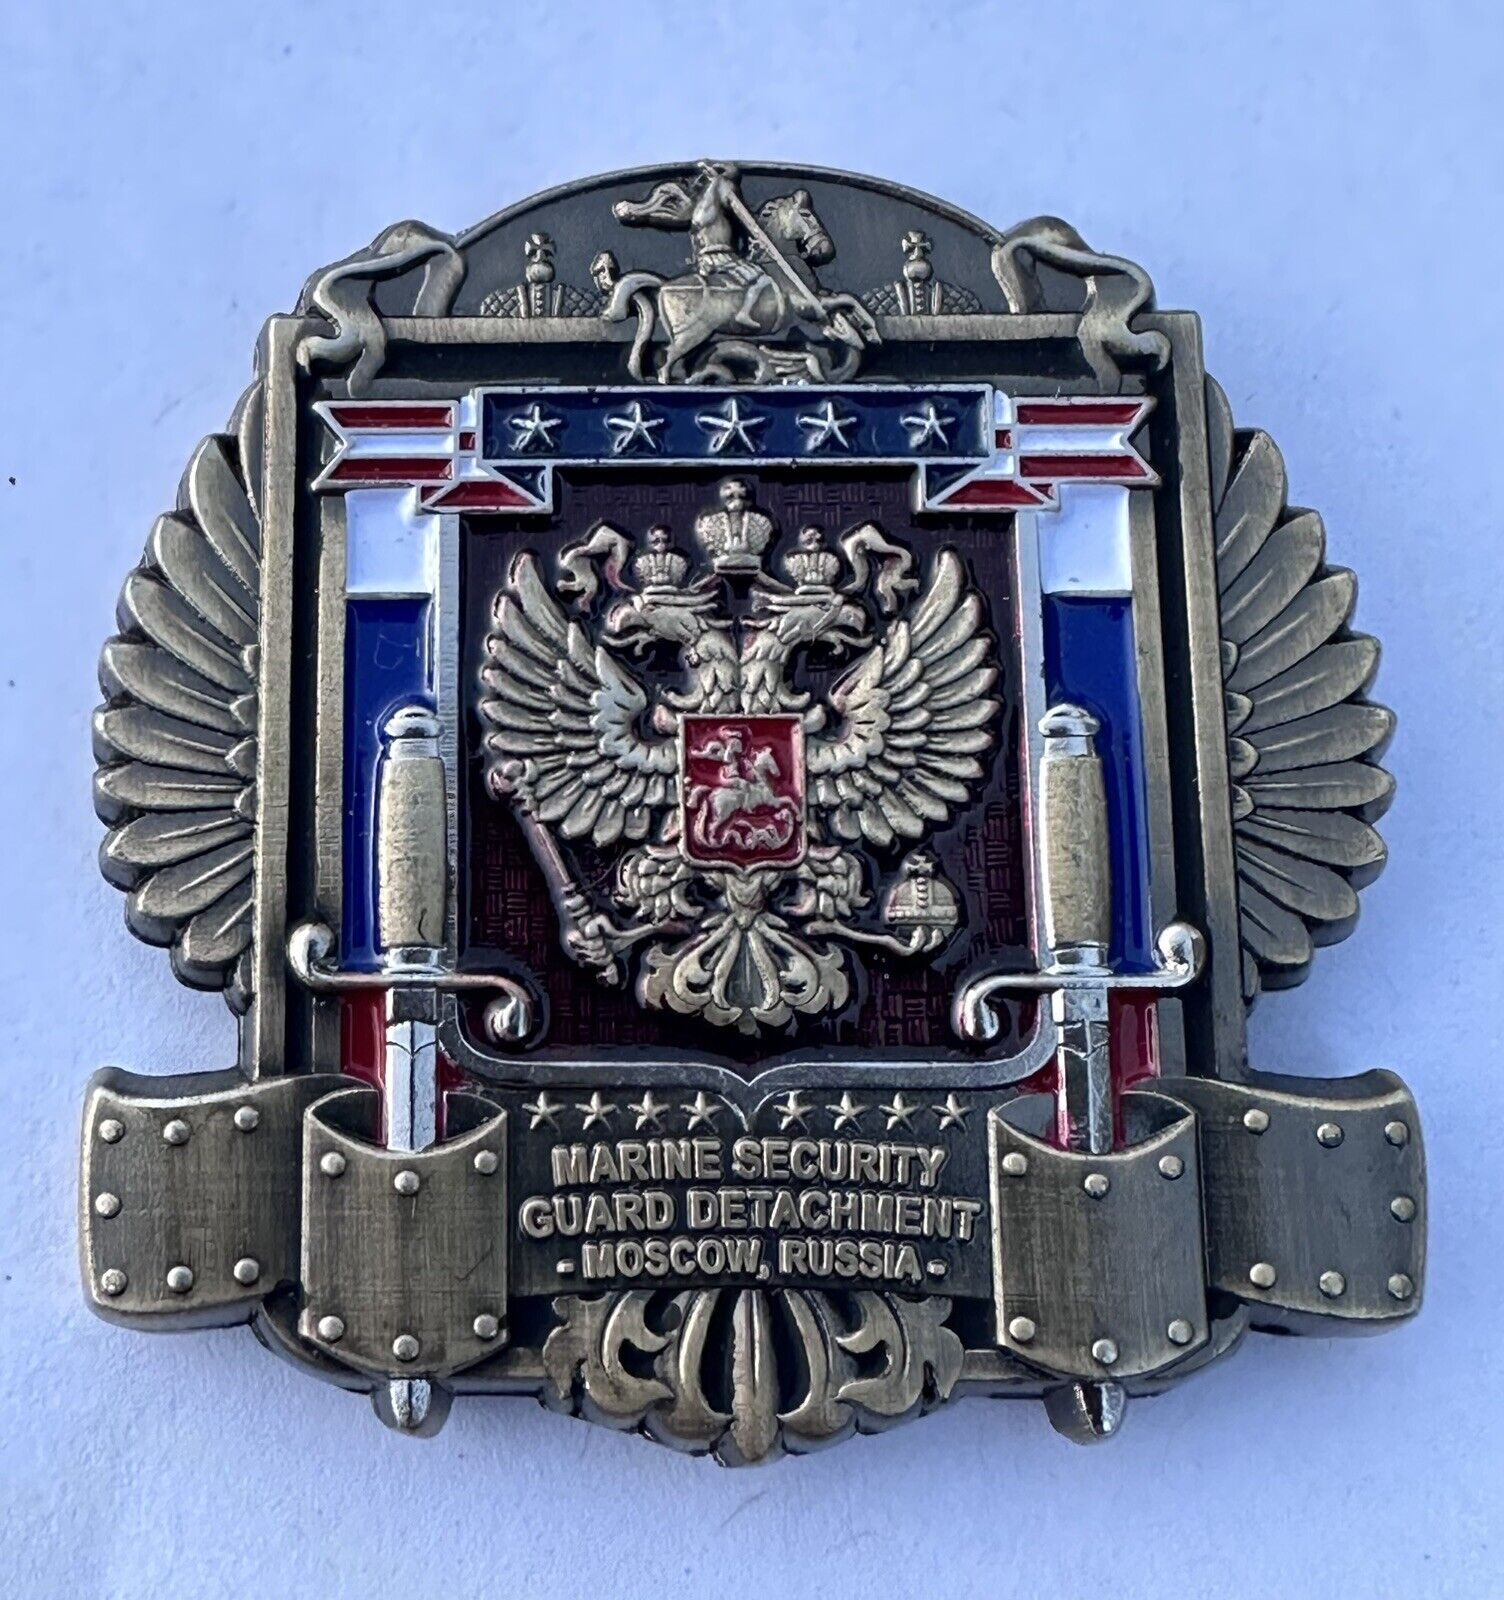 MSG Marine Security Guard Detachment Moscow, Russia Challenge Coin